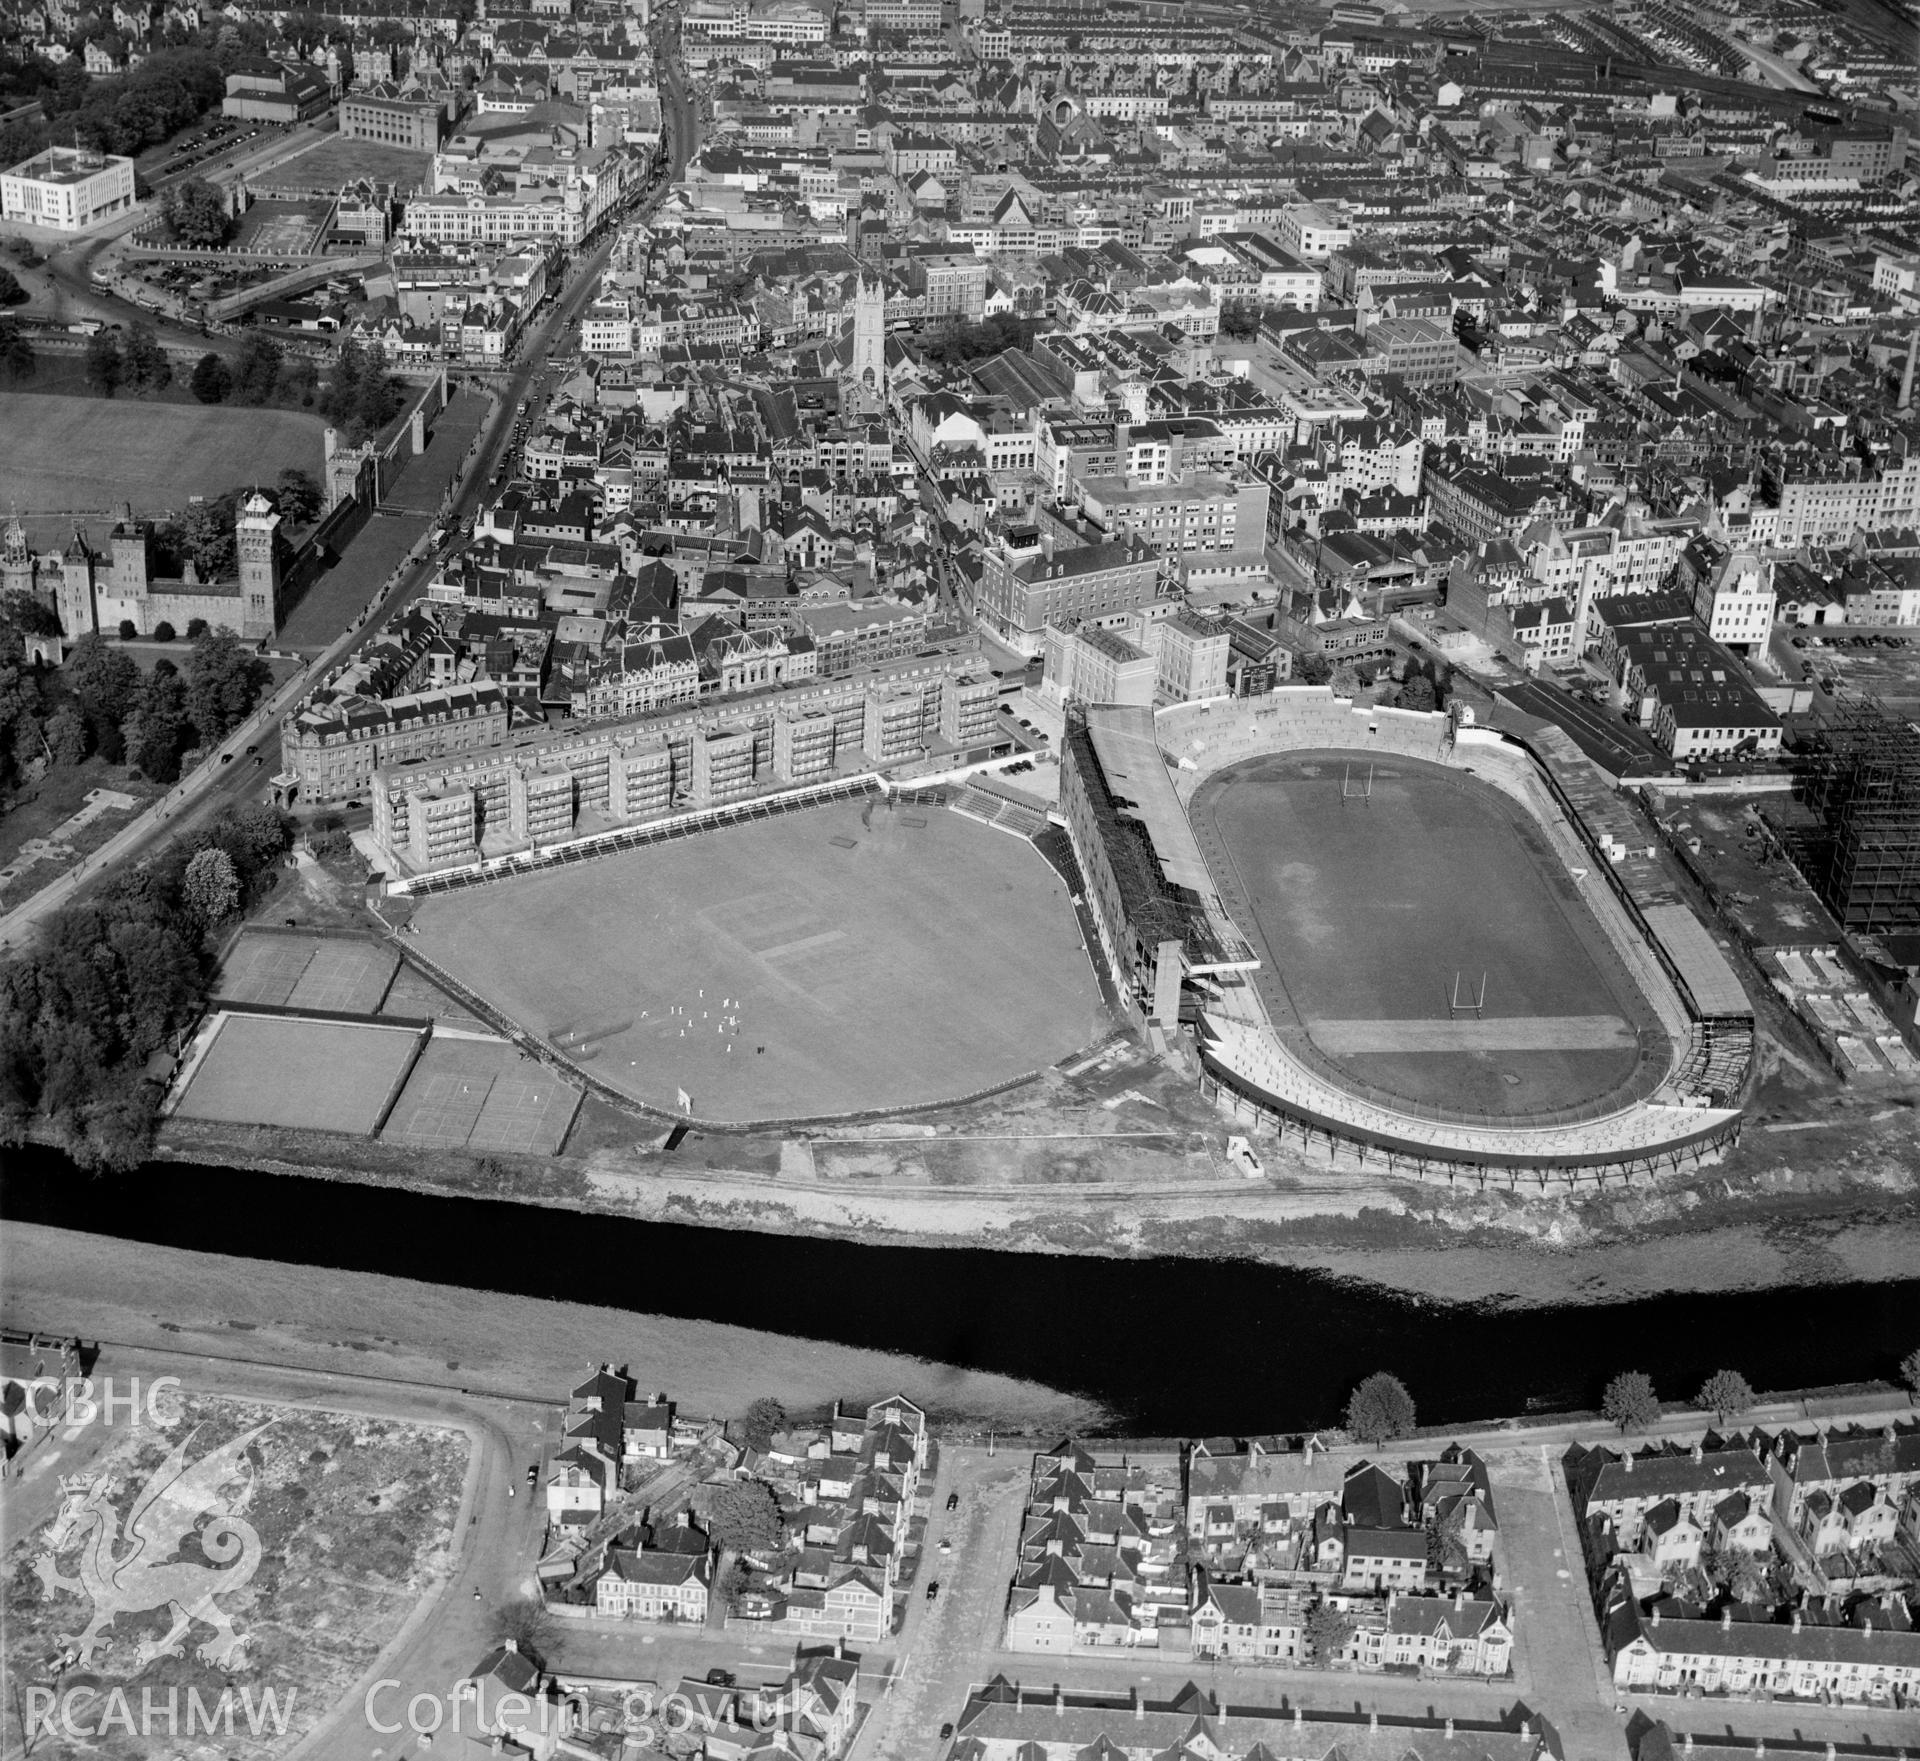 Digital copy of a black and white, oblique aerial photograph of Cardiff Arms Park. The photograph shows a view from the West showing the new North stand under construction.